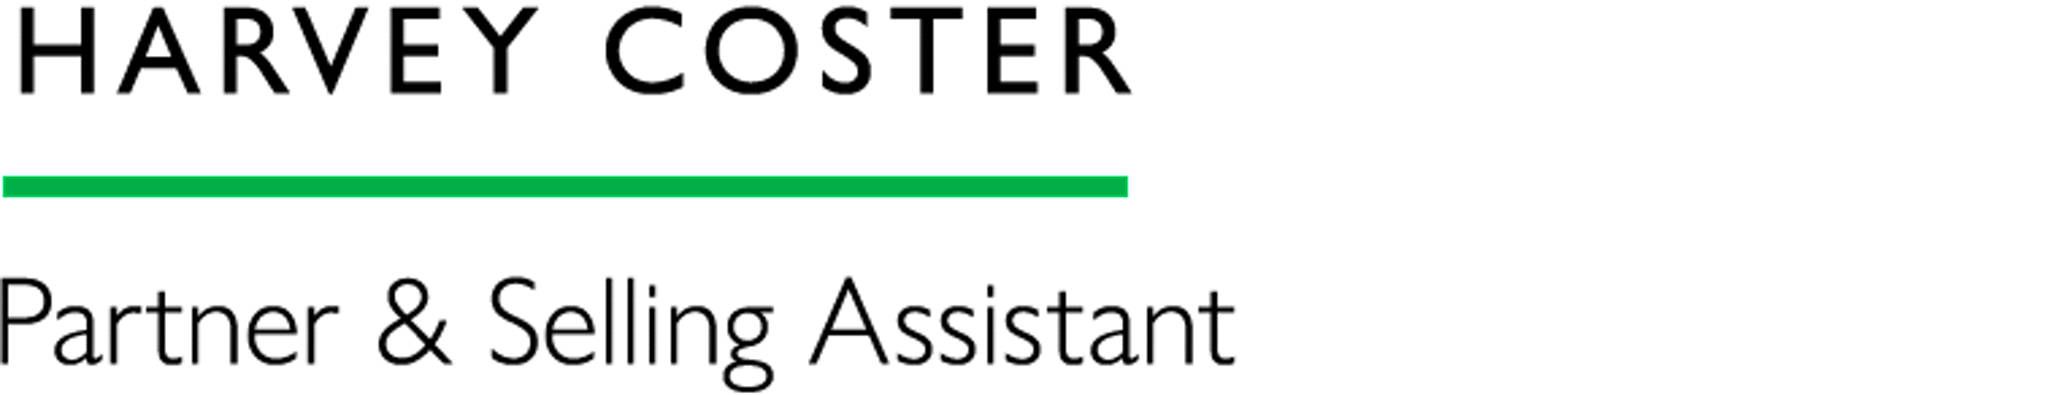 Harvey Coster - Partner & Selling Assistant